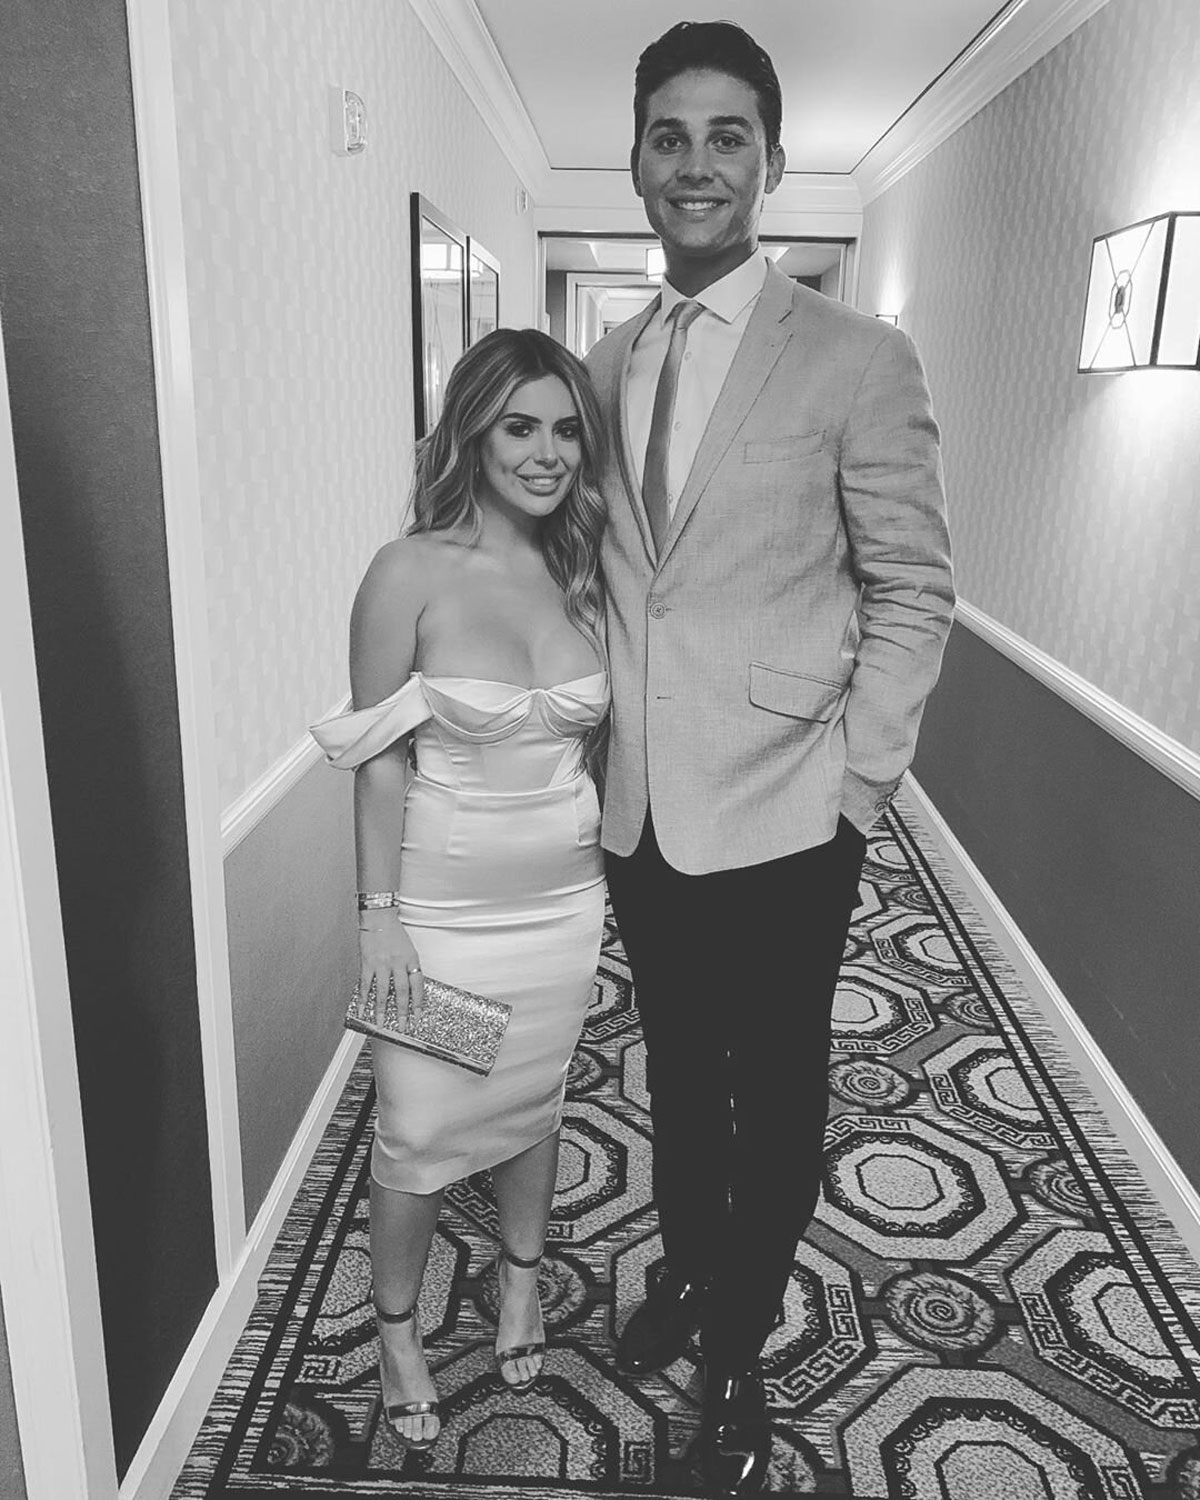 Brielle Biermann & Michael Kopech: We Might Do Spin-off Show, IF We Get  Married